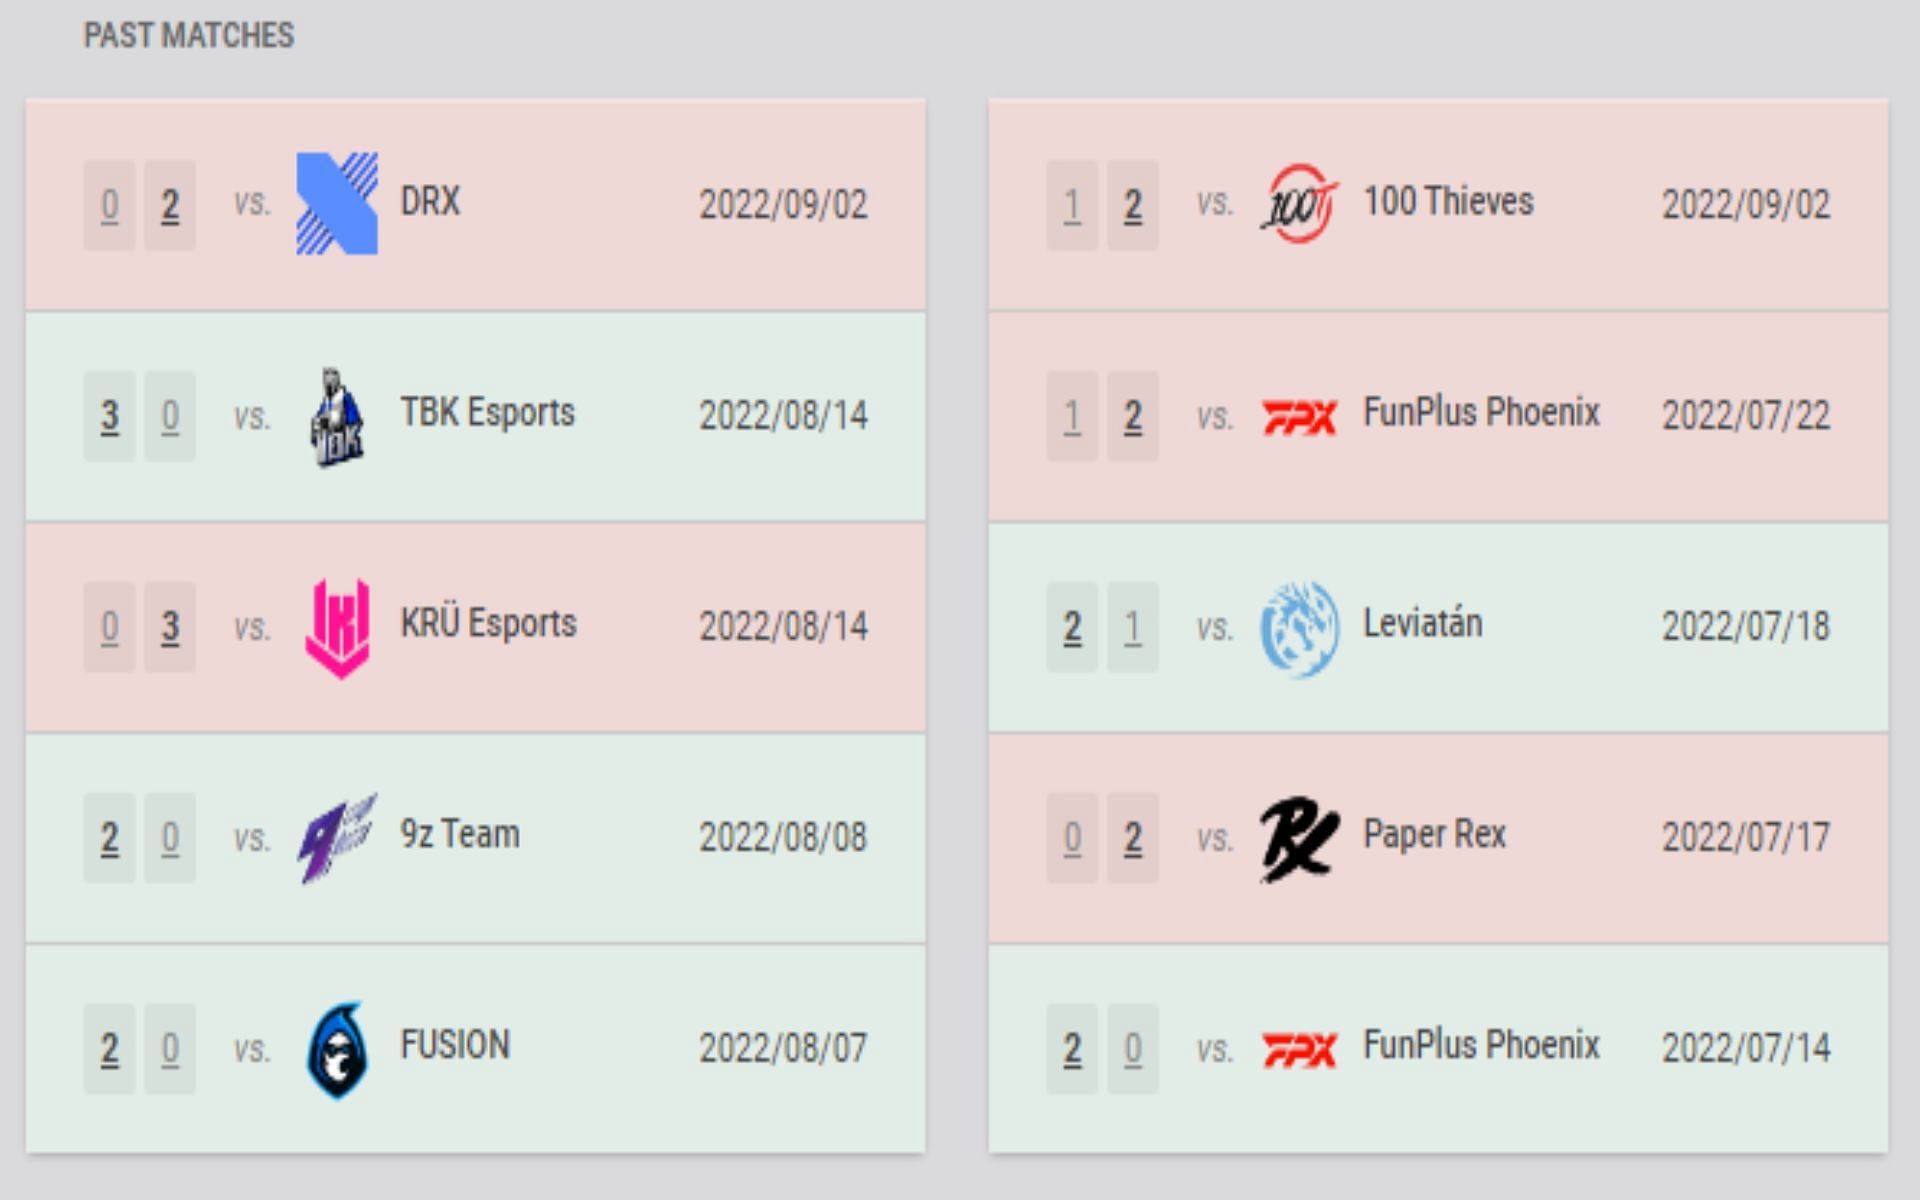 Recent match results for Furia and Fnatic (Image via vlr.gg)